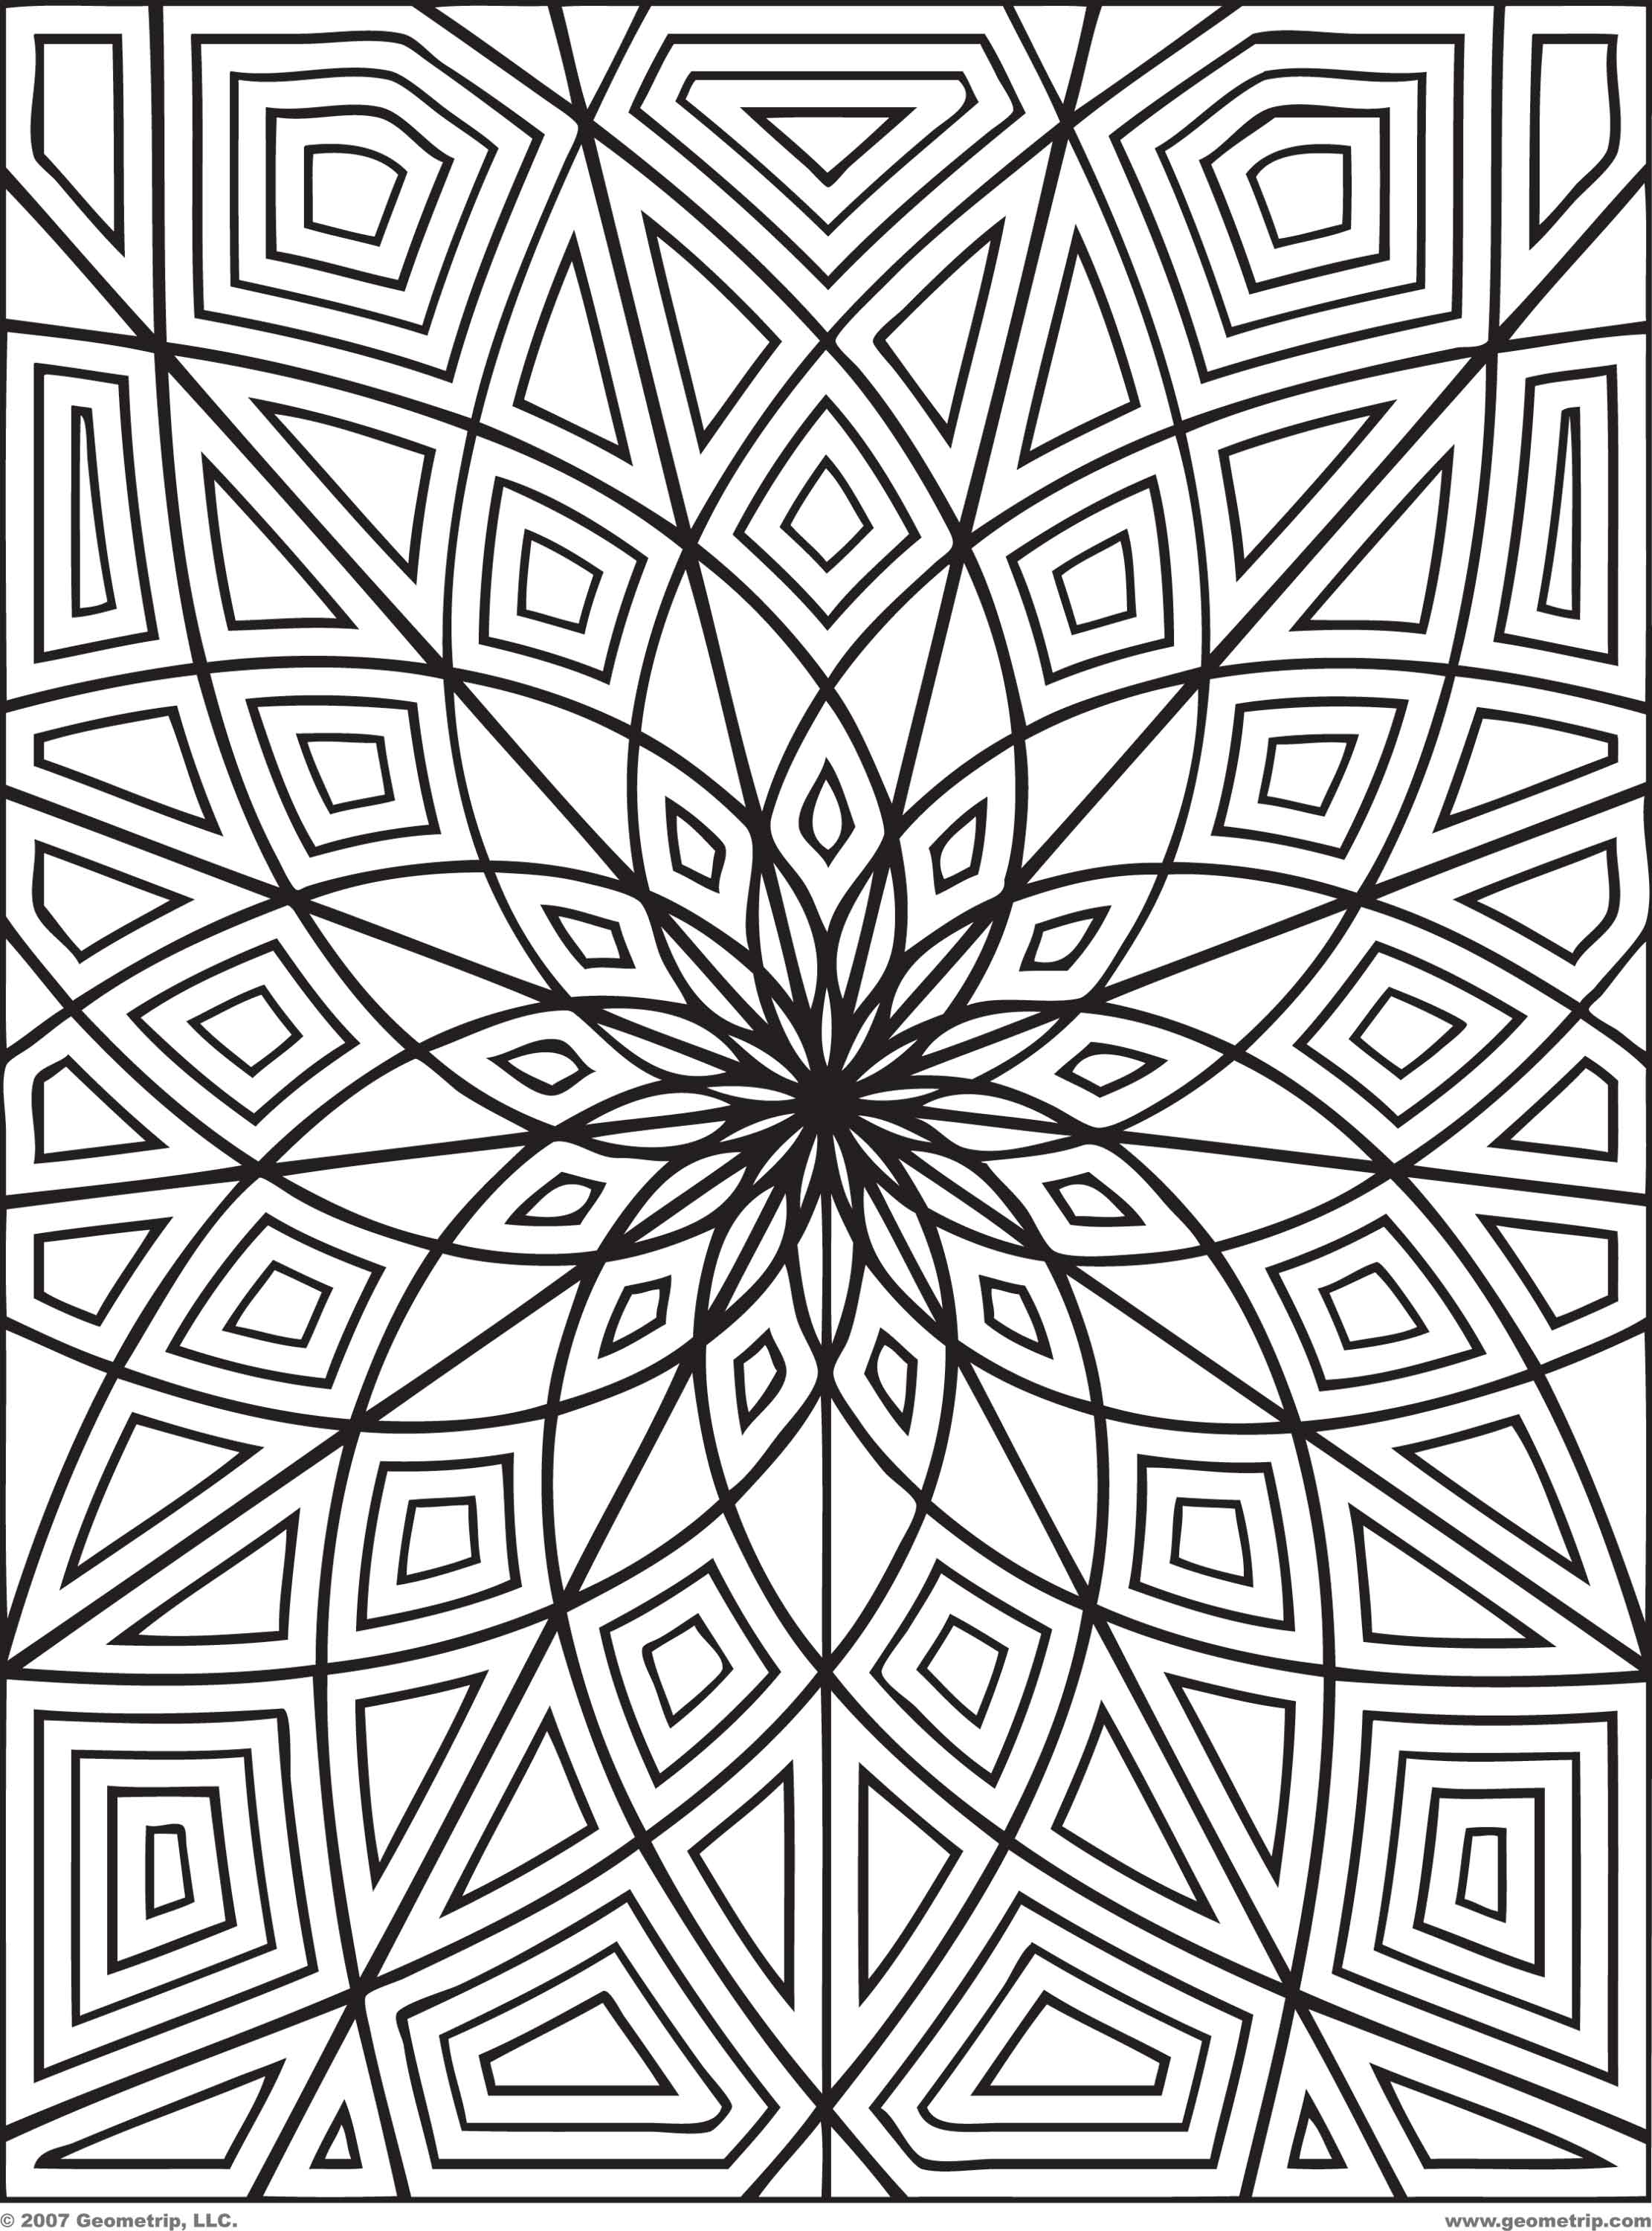 Adult Coloring Pages - Dr. Odd